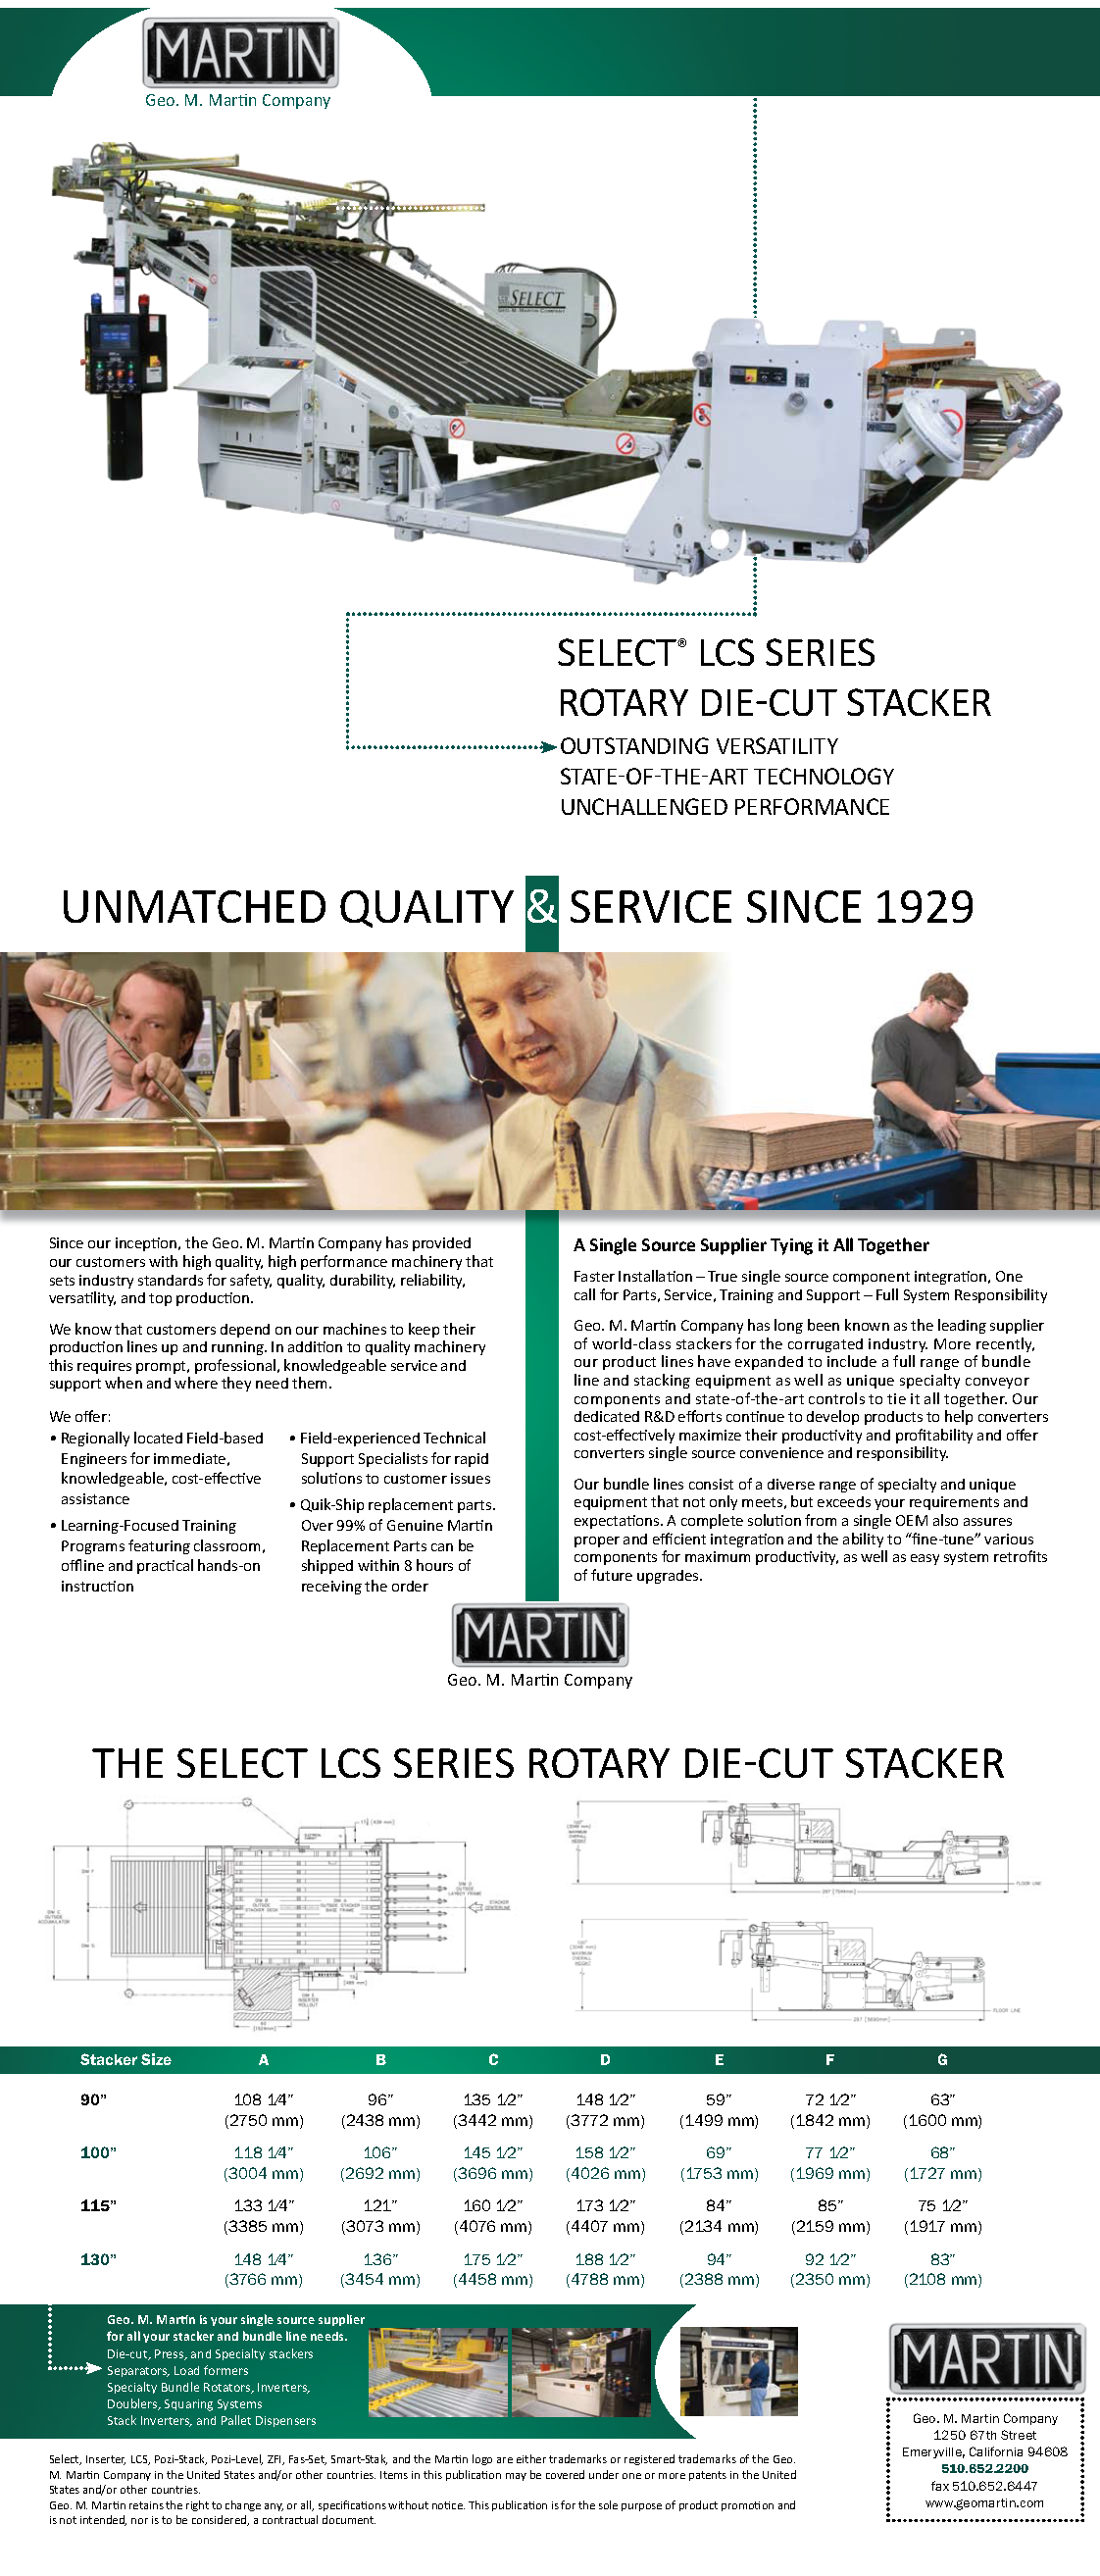 Learn more about the Select LCS Rotary Die Cutter Stacker in the Geo. M. Martin brochure!